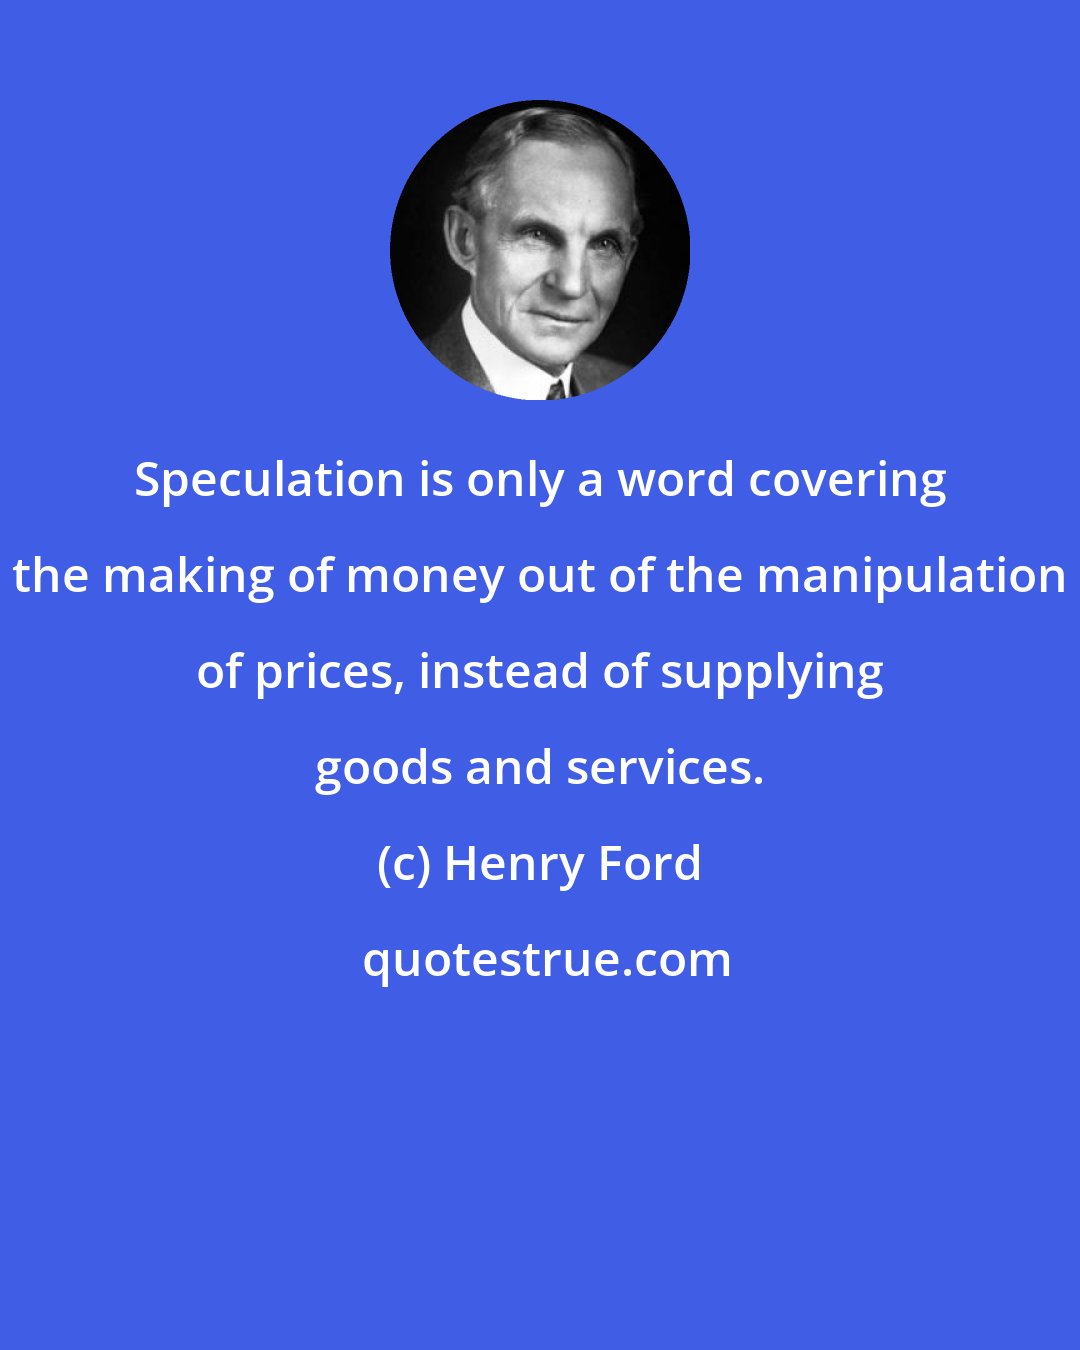 Henry Ford: Speculation is only a word covering the making of money out of the manipulation of prices, instead of supplying goods and services.